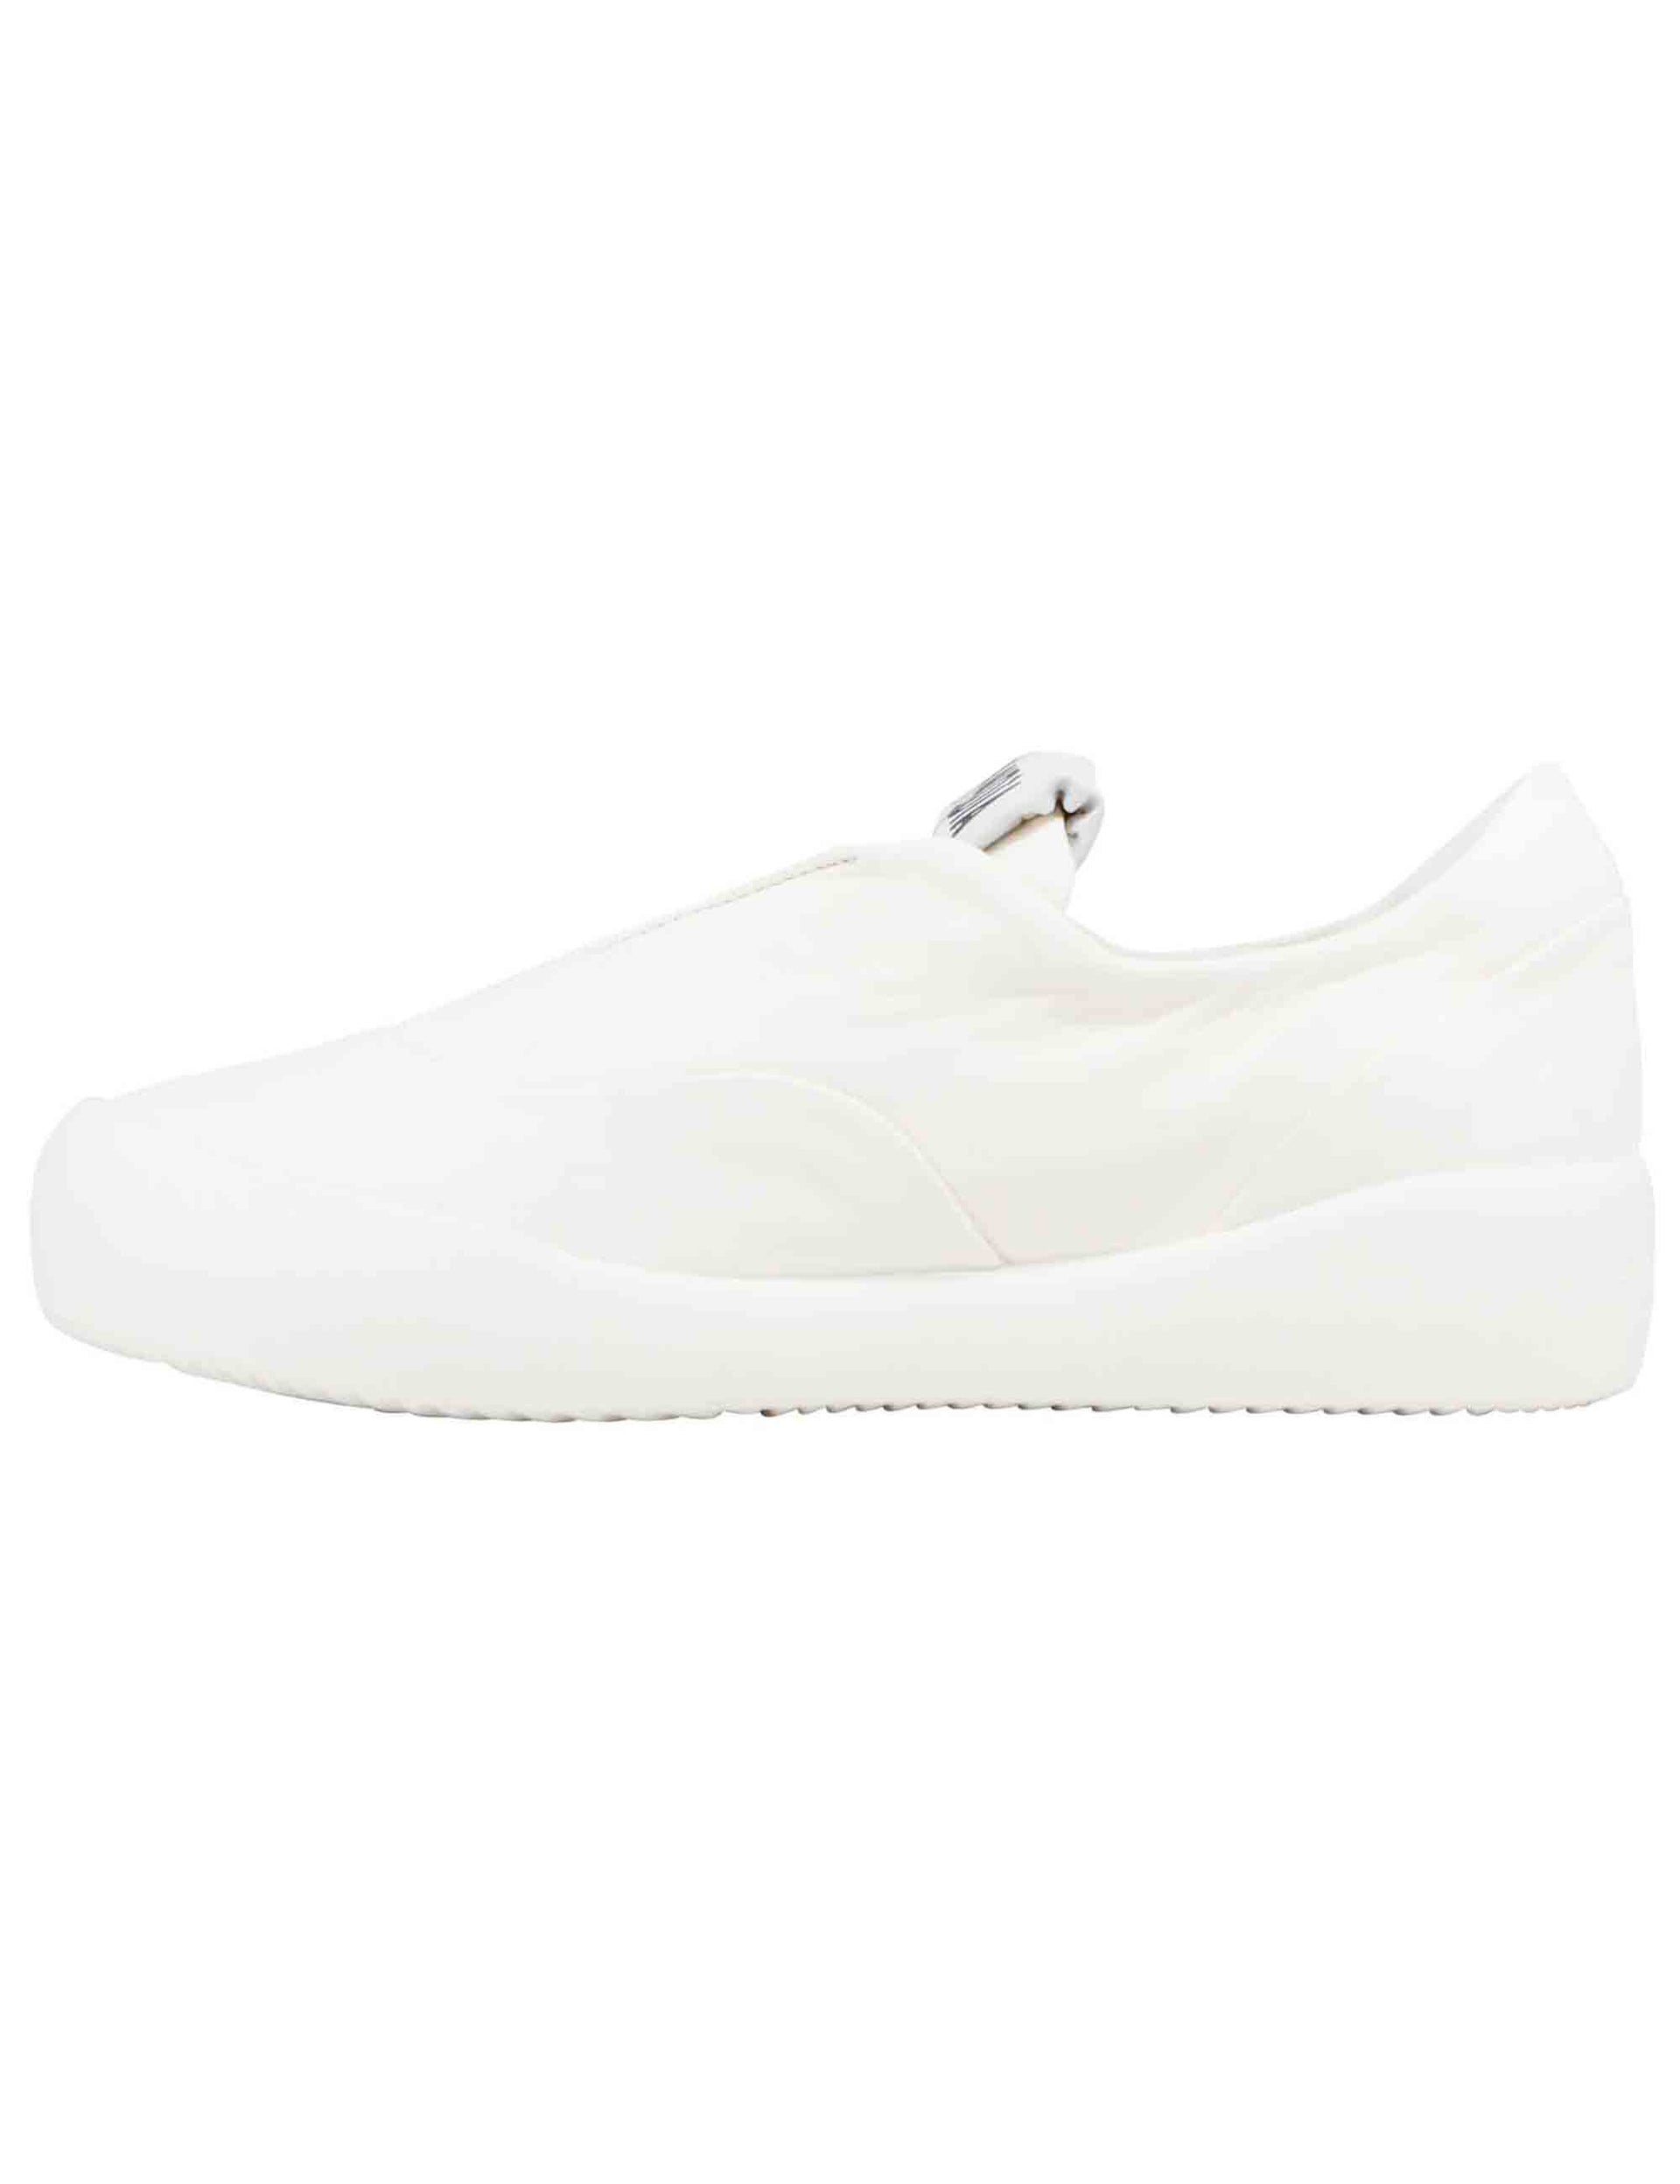 Women's off-white leather sneakers with light rubber sole